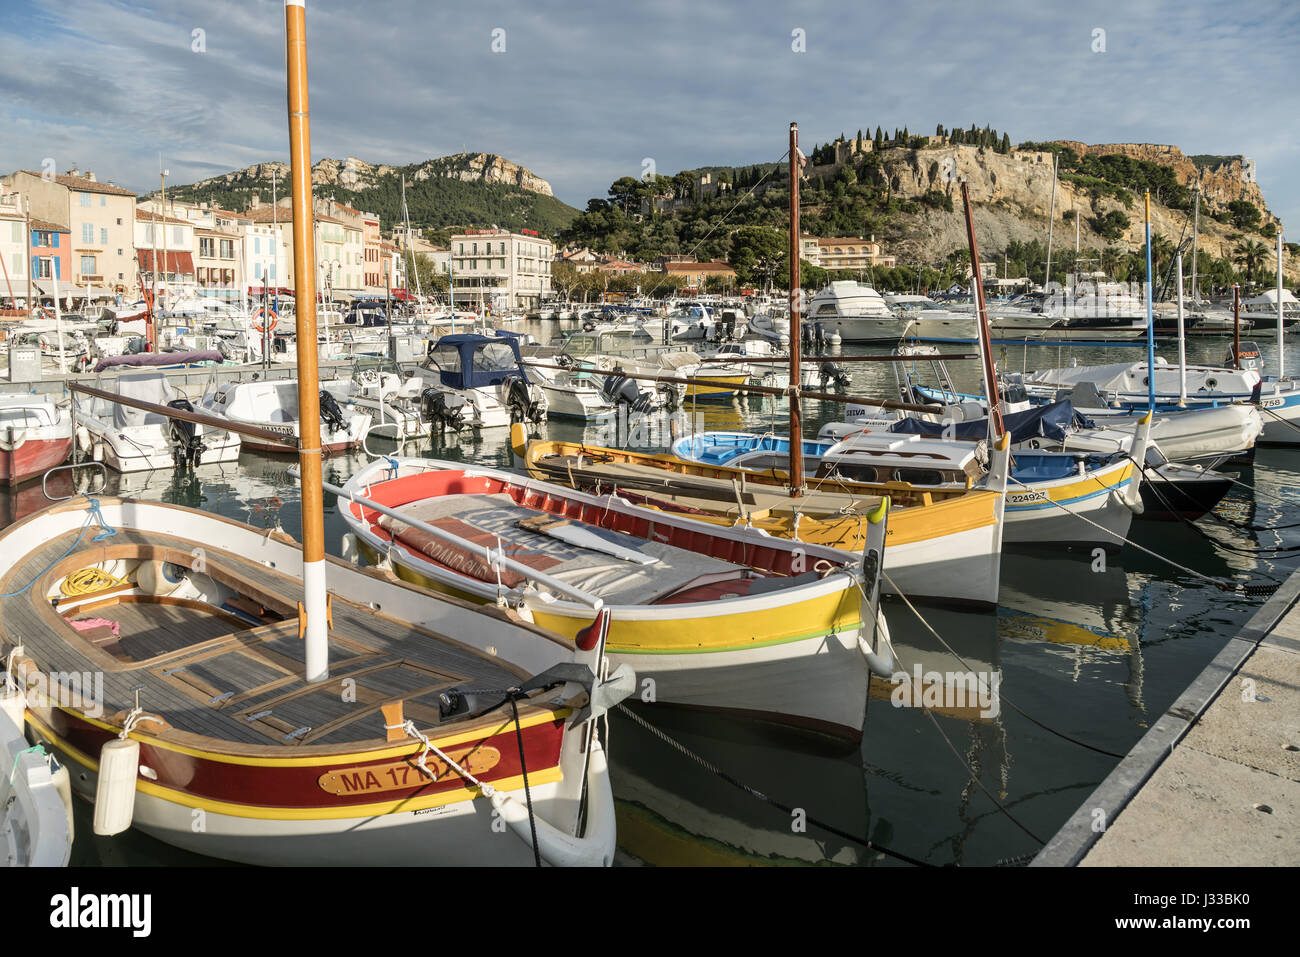 Boote in Cassis harbour Cassis, Cote d Azur, Frankreich Stockfoto